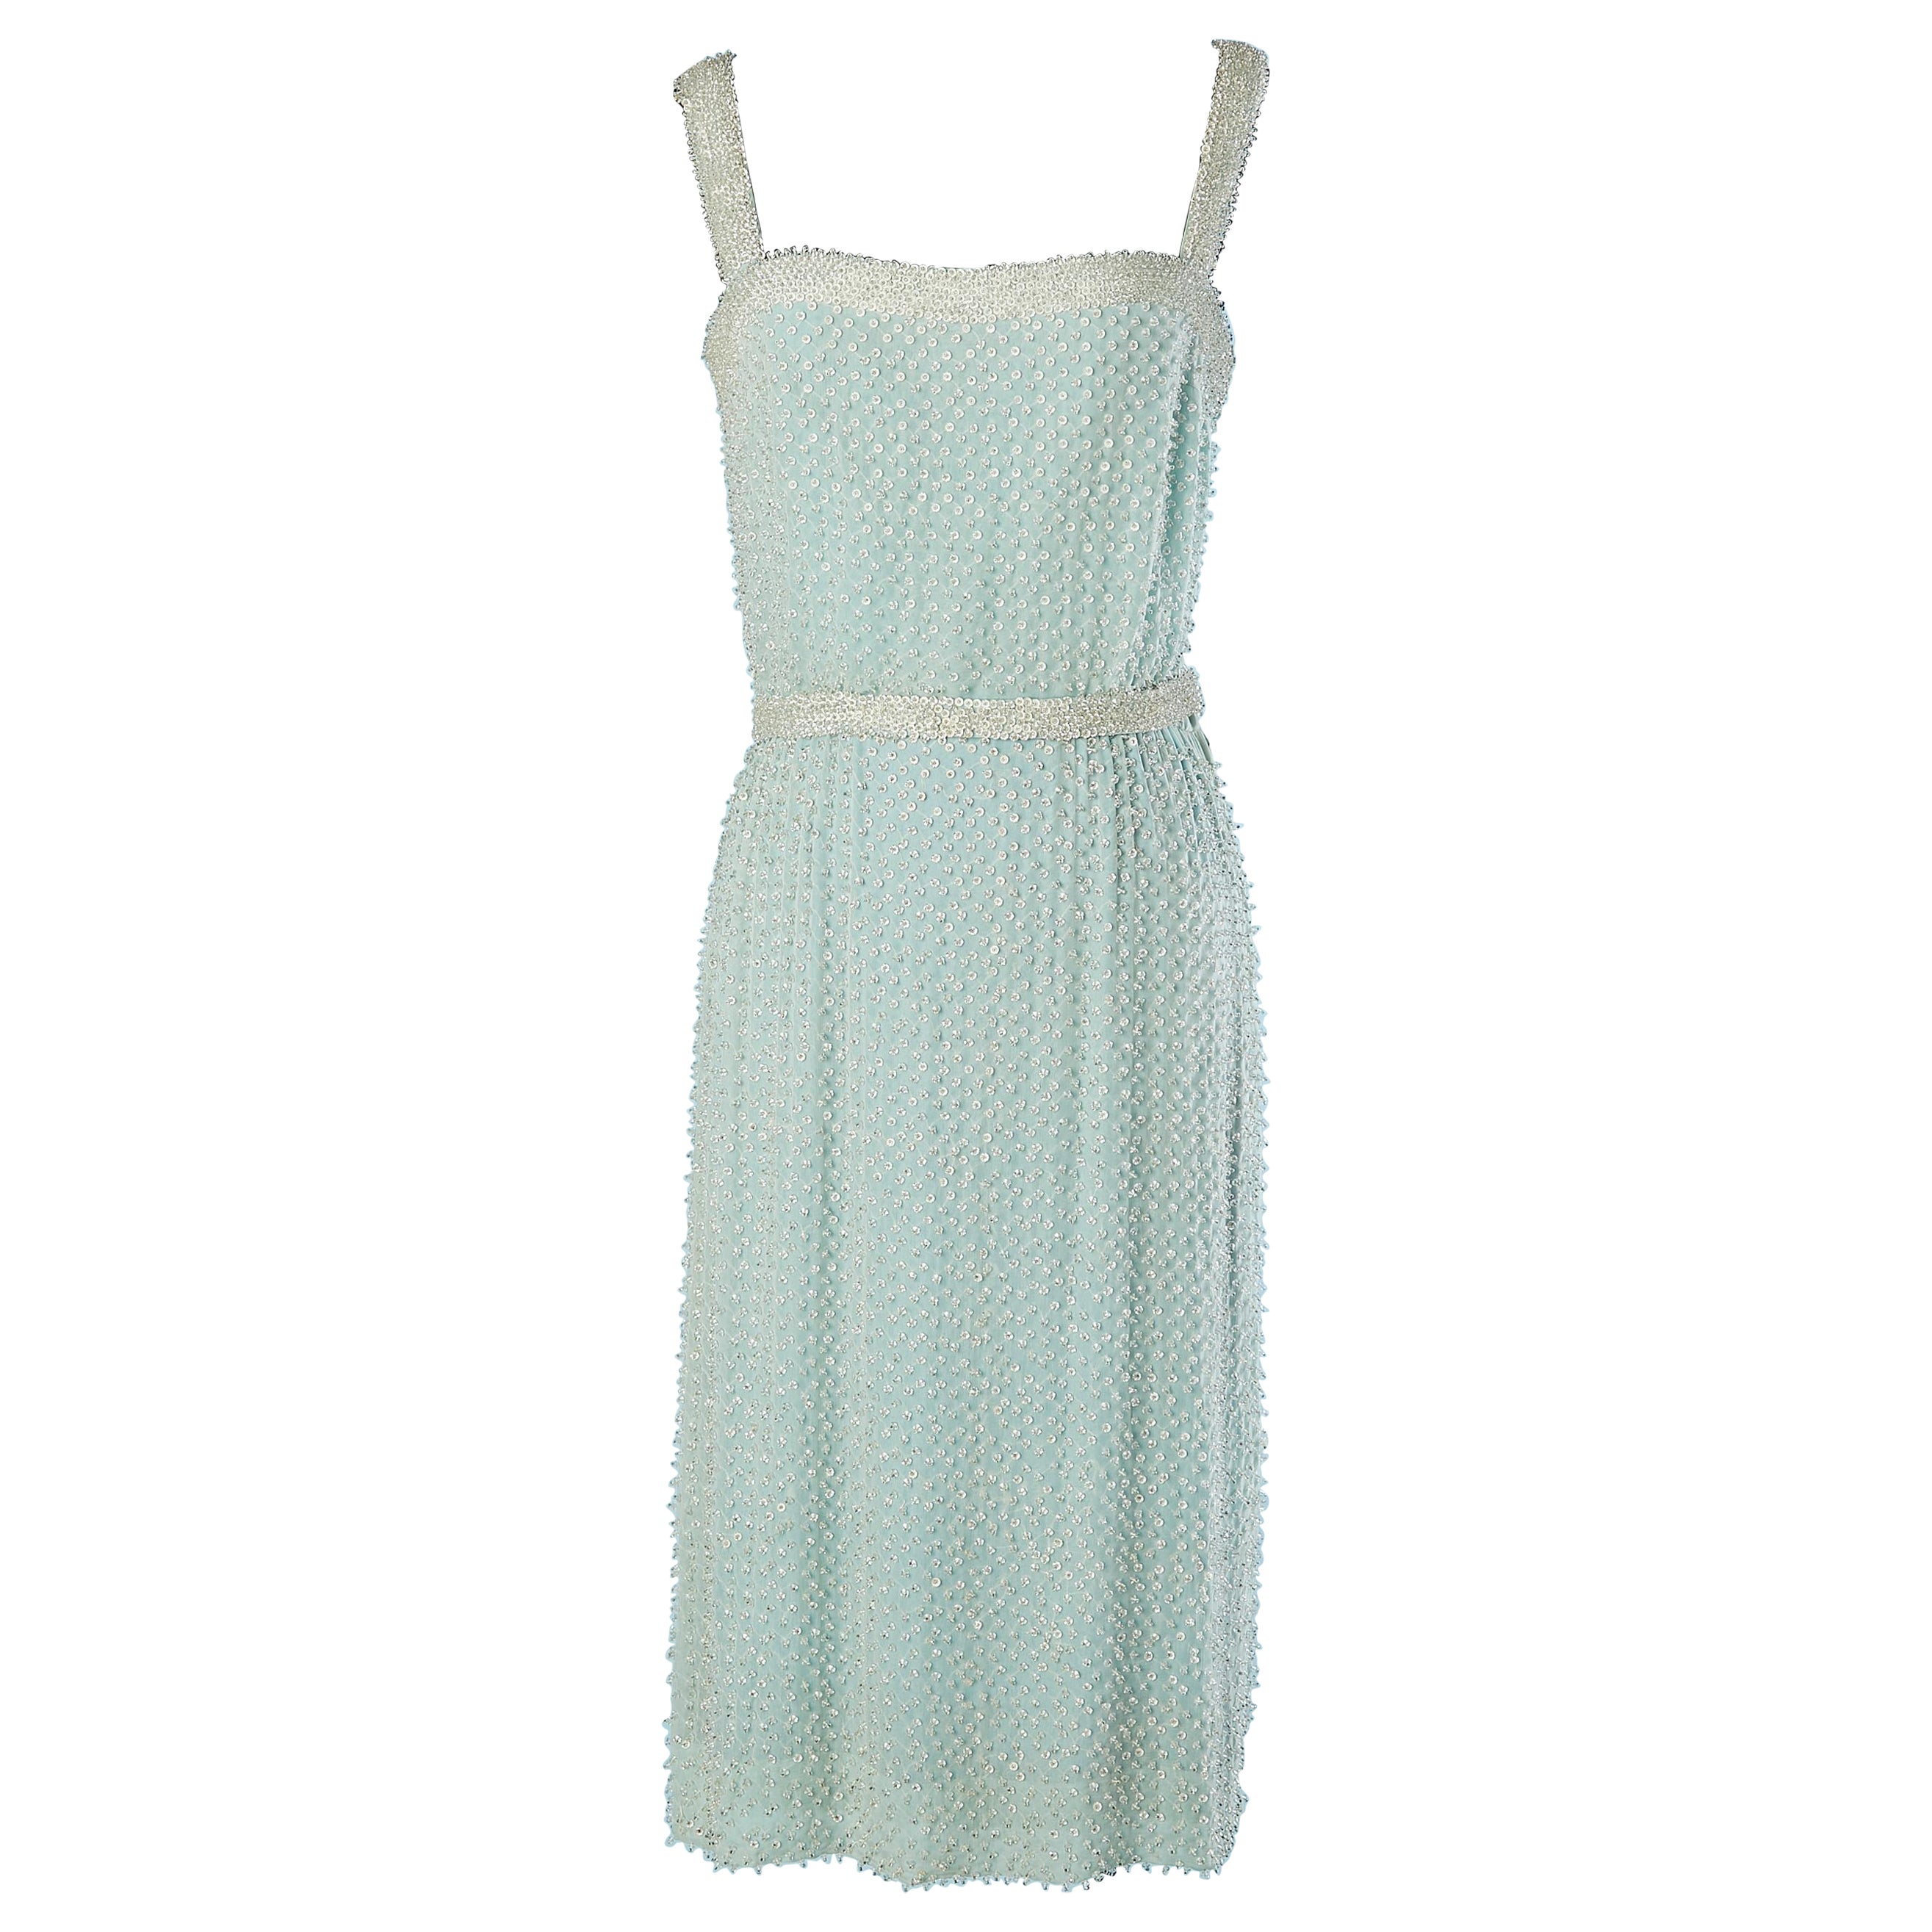 Pale blue fully beaded cocktail dress Circa 1960 For Sale